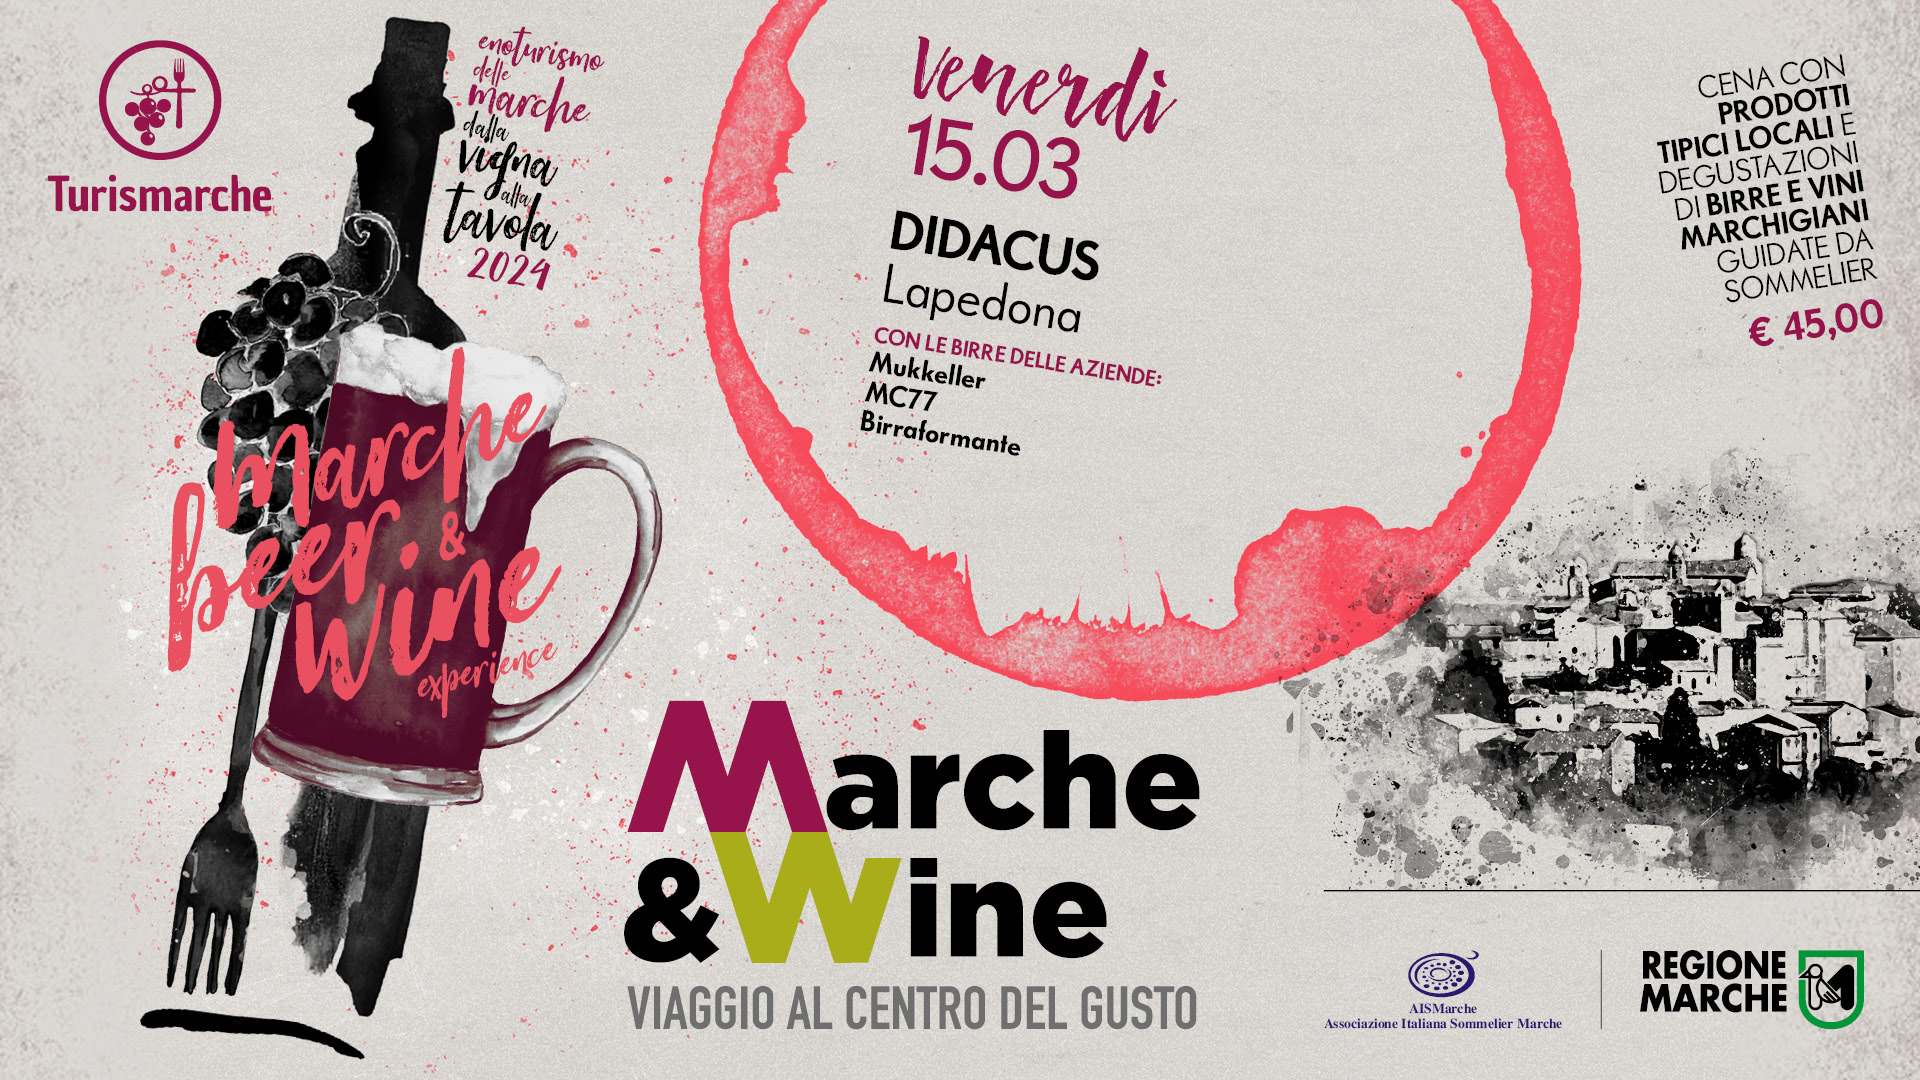 Marche Beer & Wine Experience - Ristorante Didacus